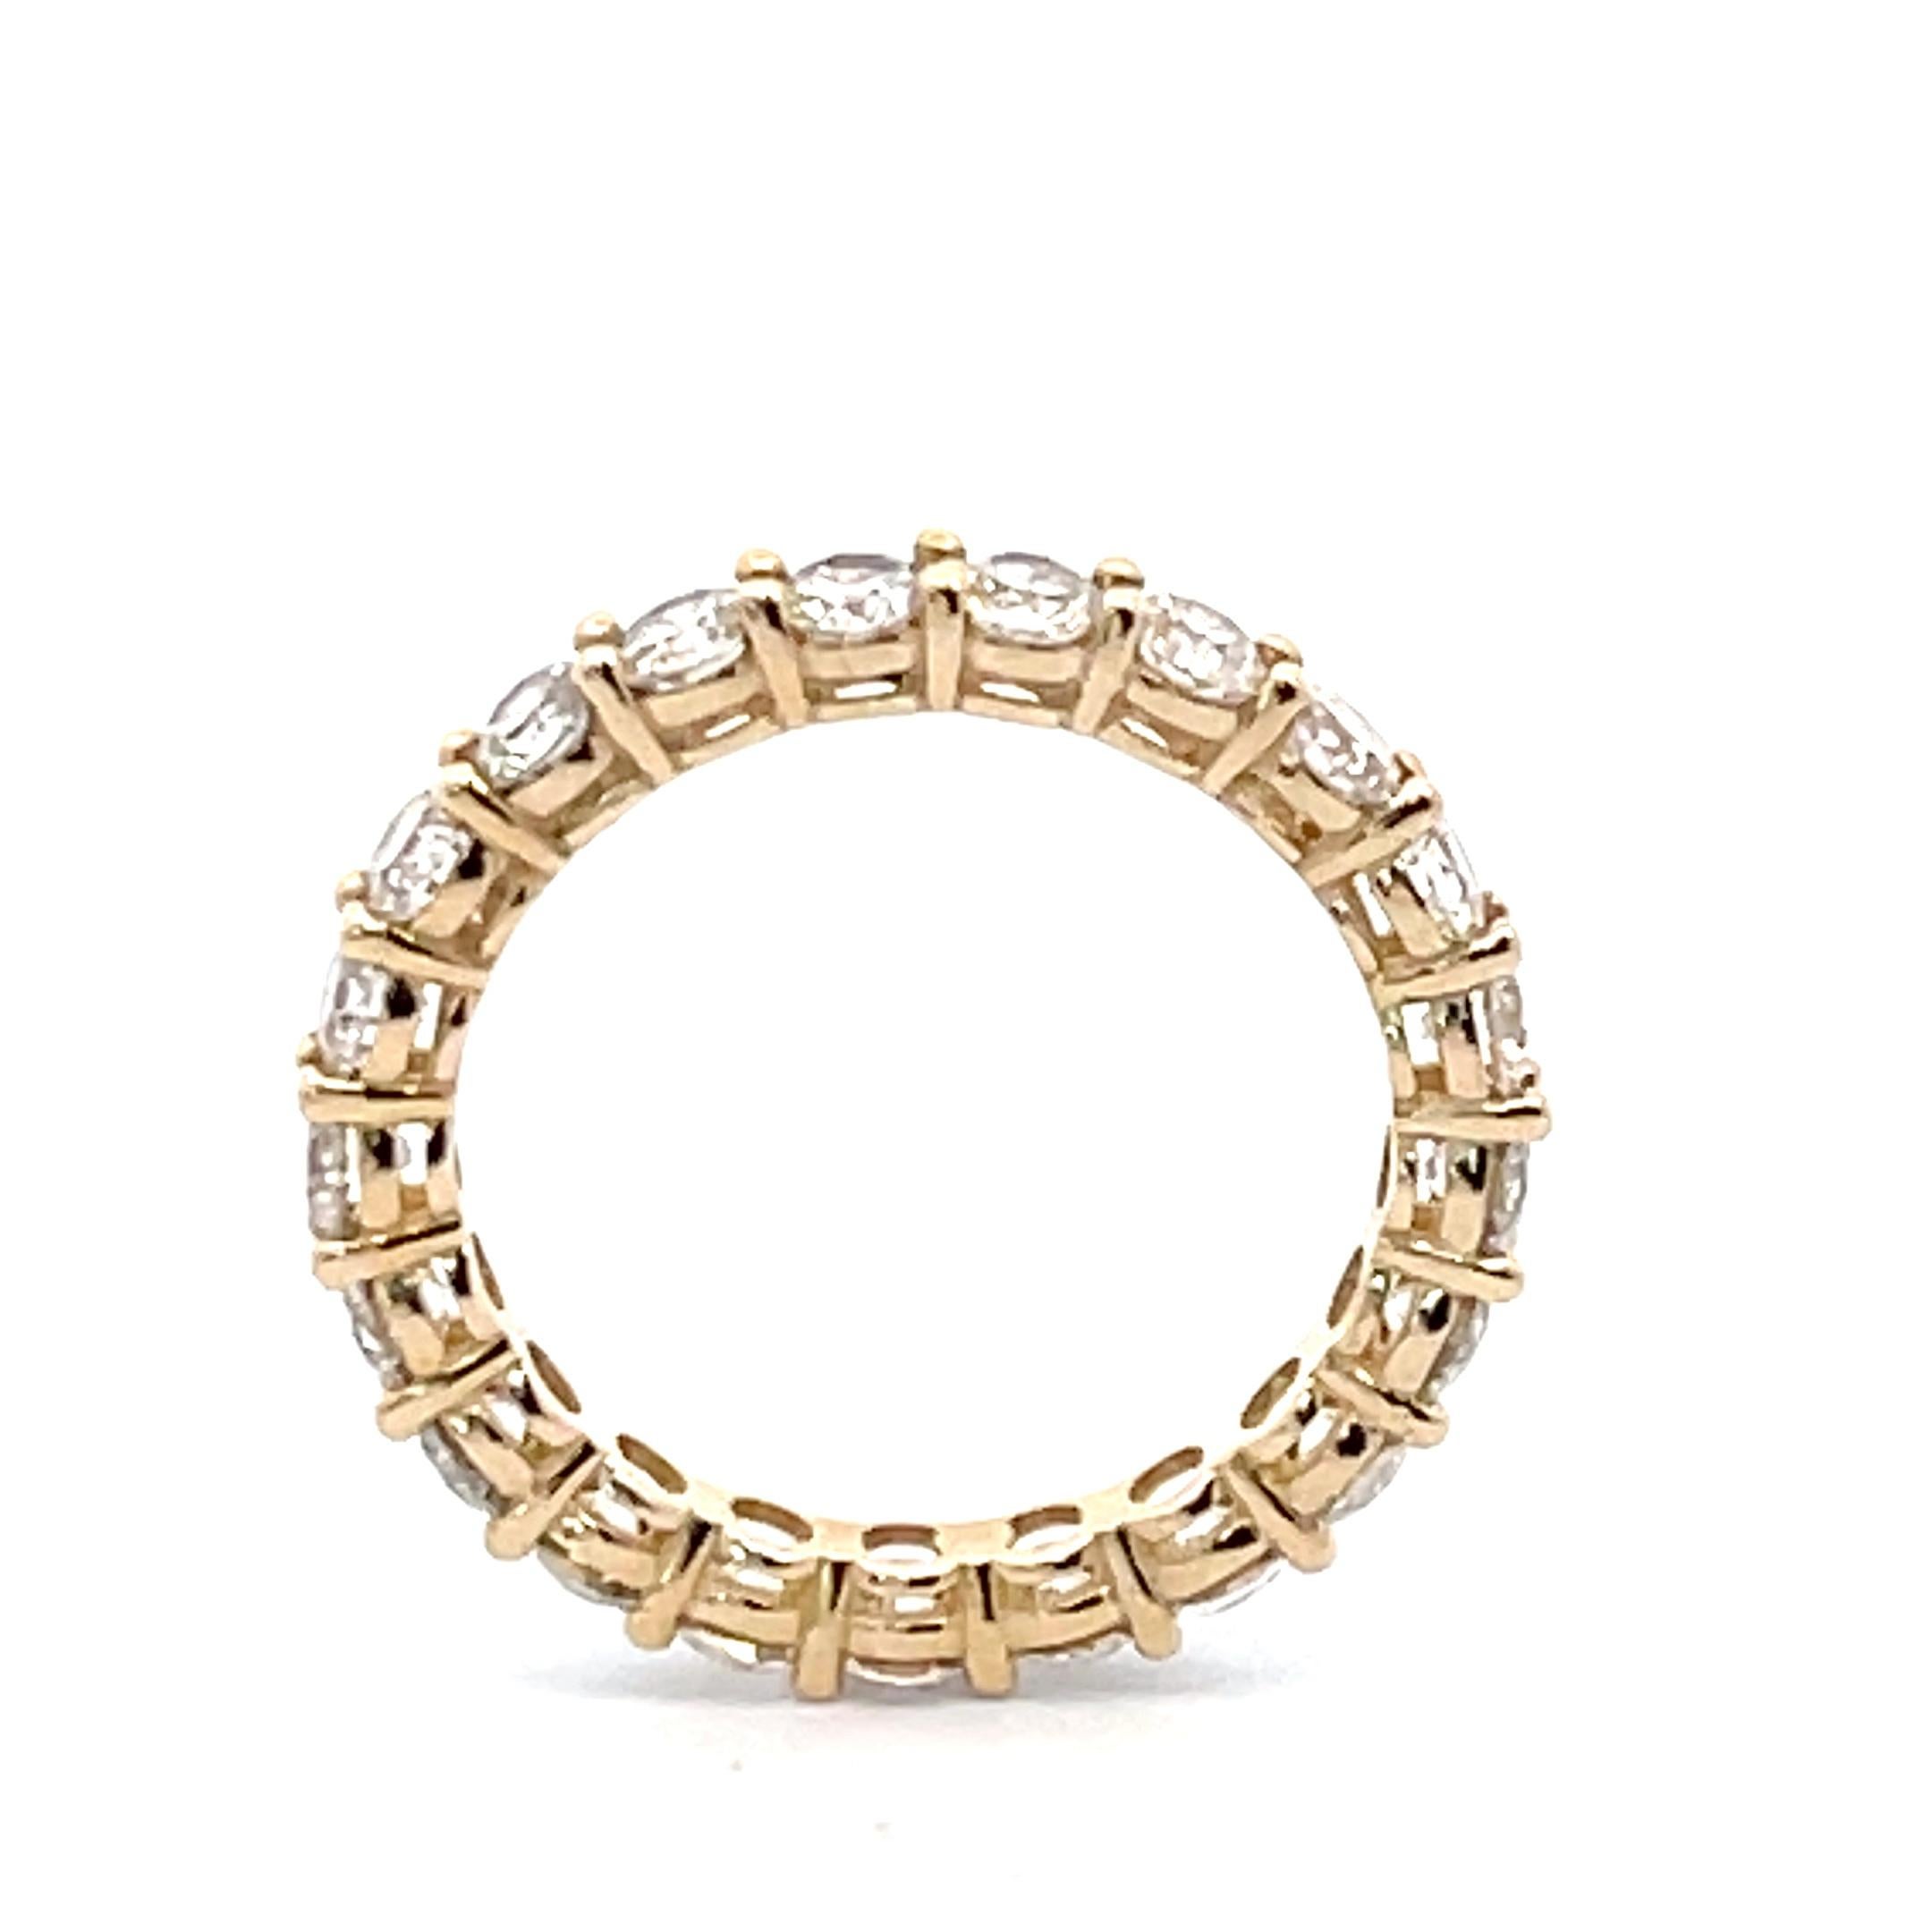 Treat yourself to a classic, timeless piece of jewelry with this 2.35 carat round brilliant cut diamond eternity wedding band in 14K yellow gold. This stunning eternity band ring is crafted with 21 round diamonds in a common prong setting, and its